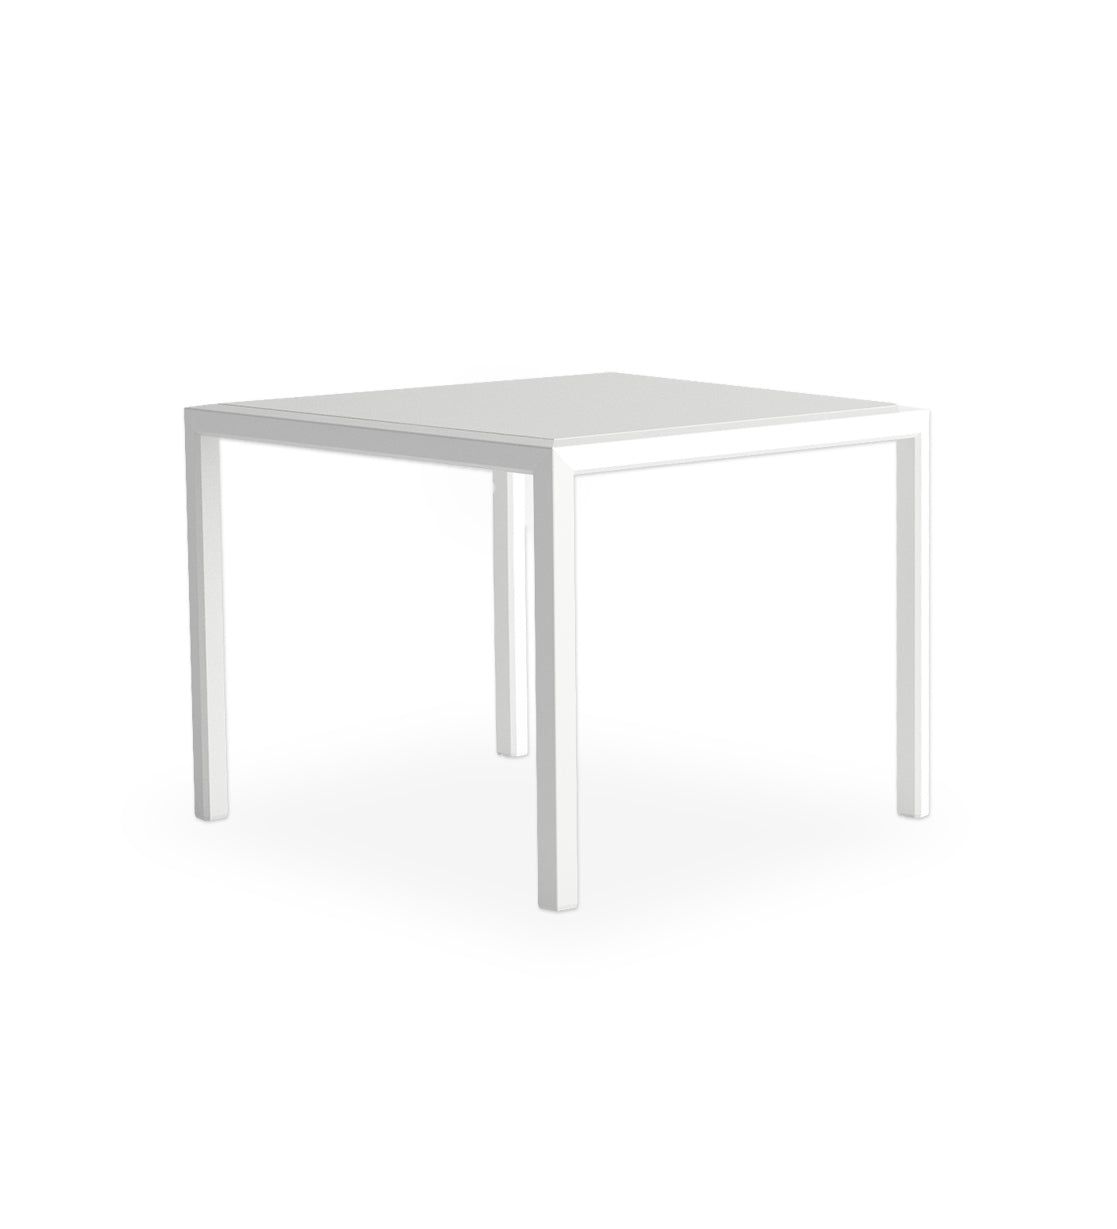 10DEKA Victus Small Square Dining Table